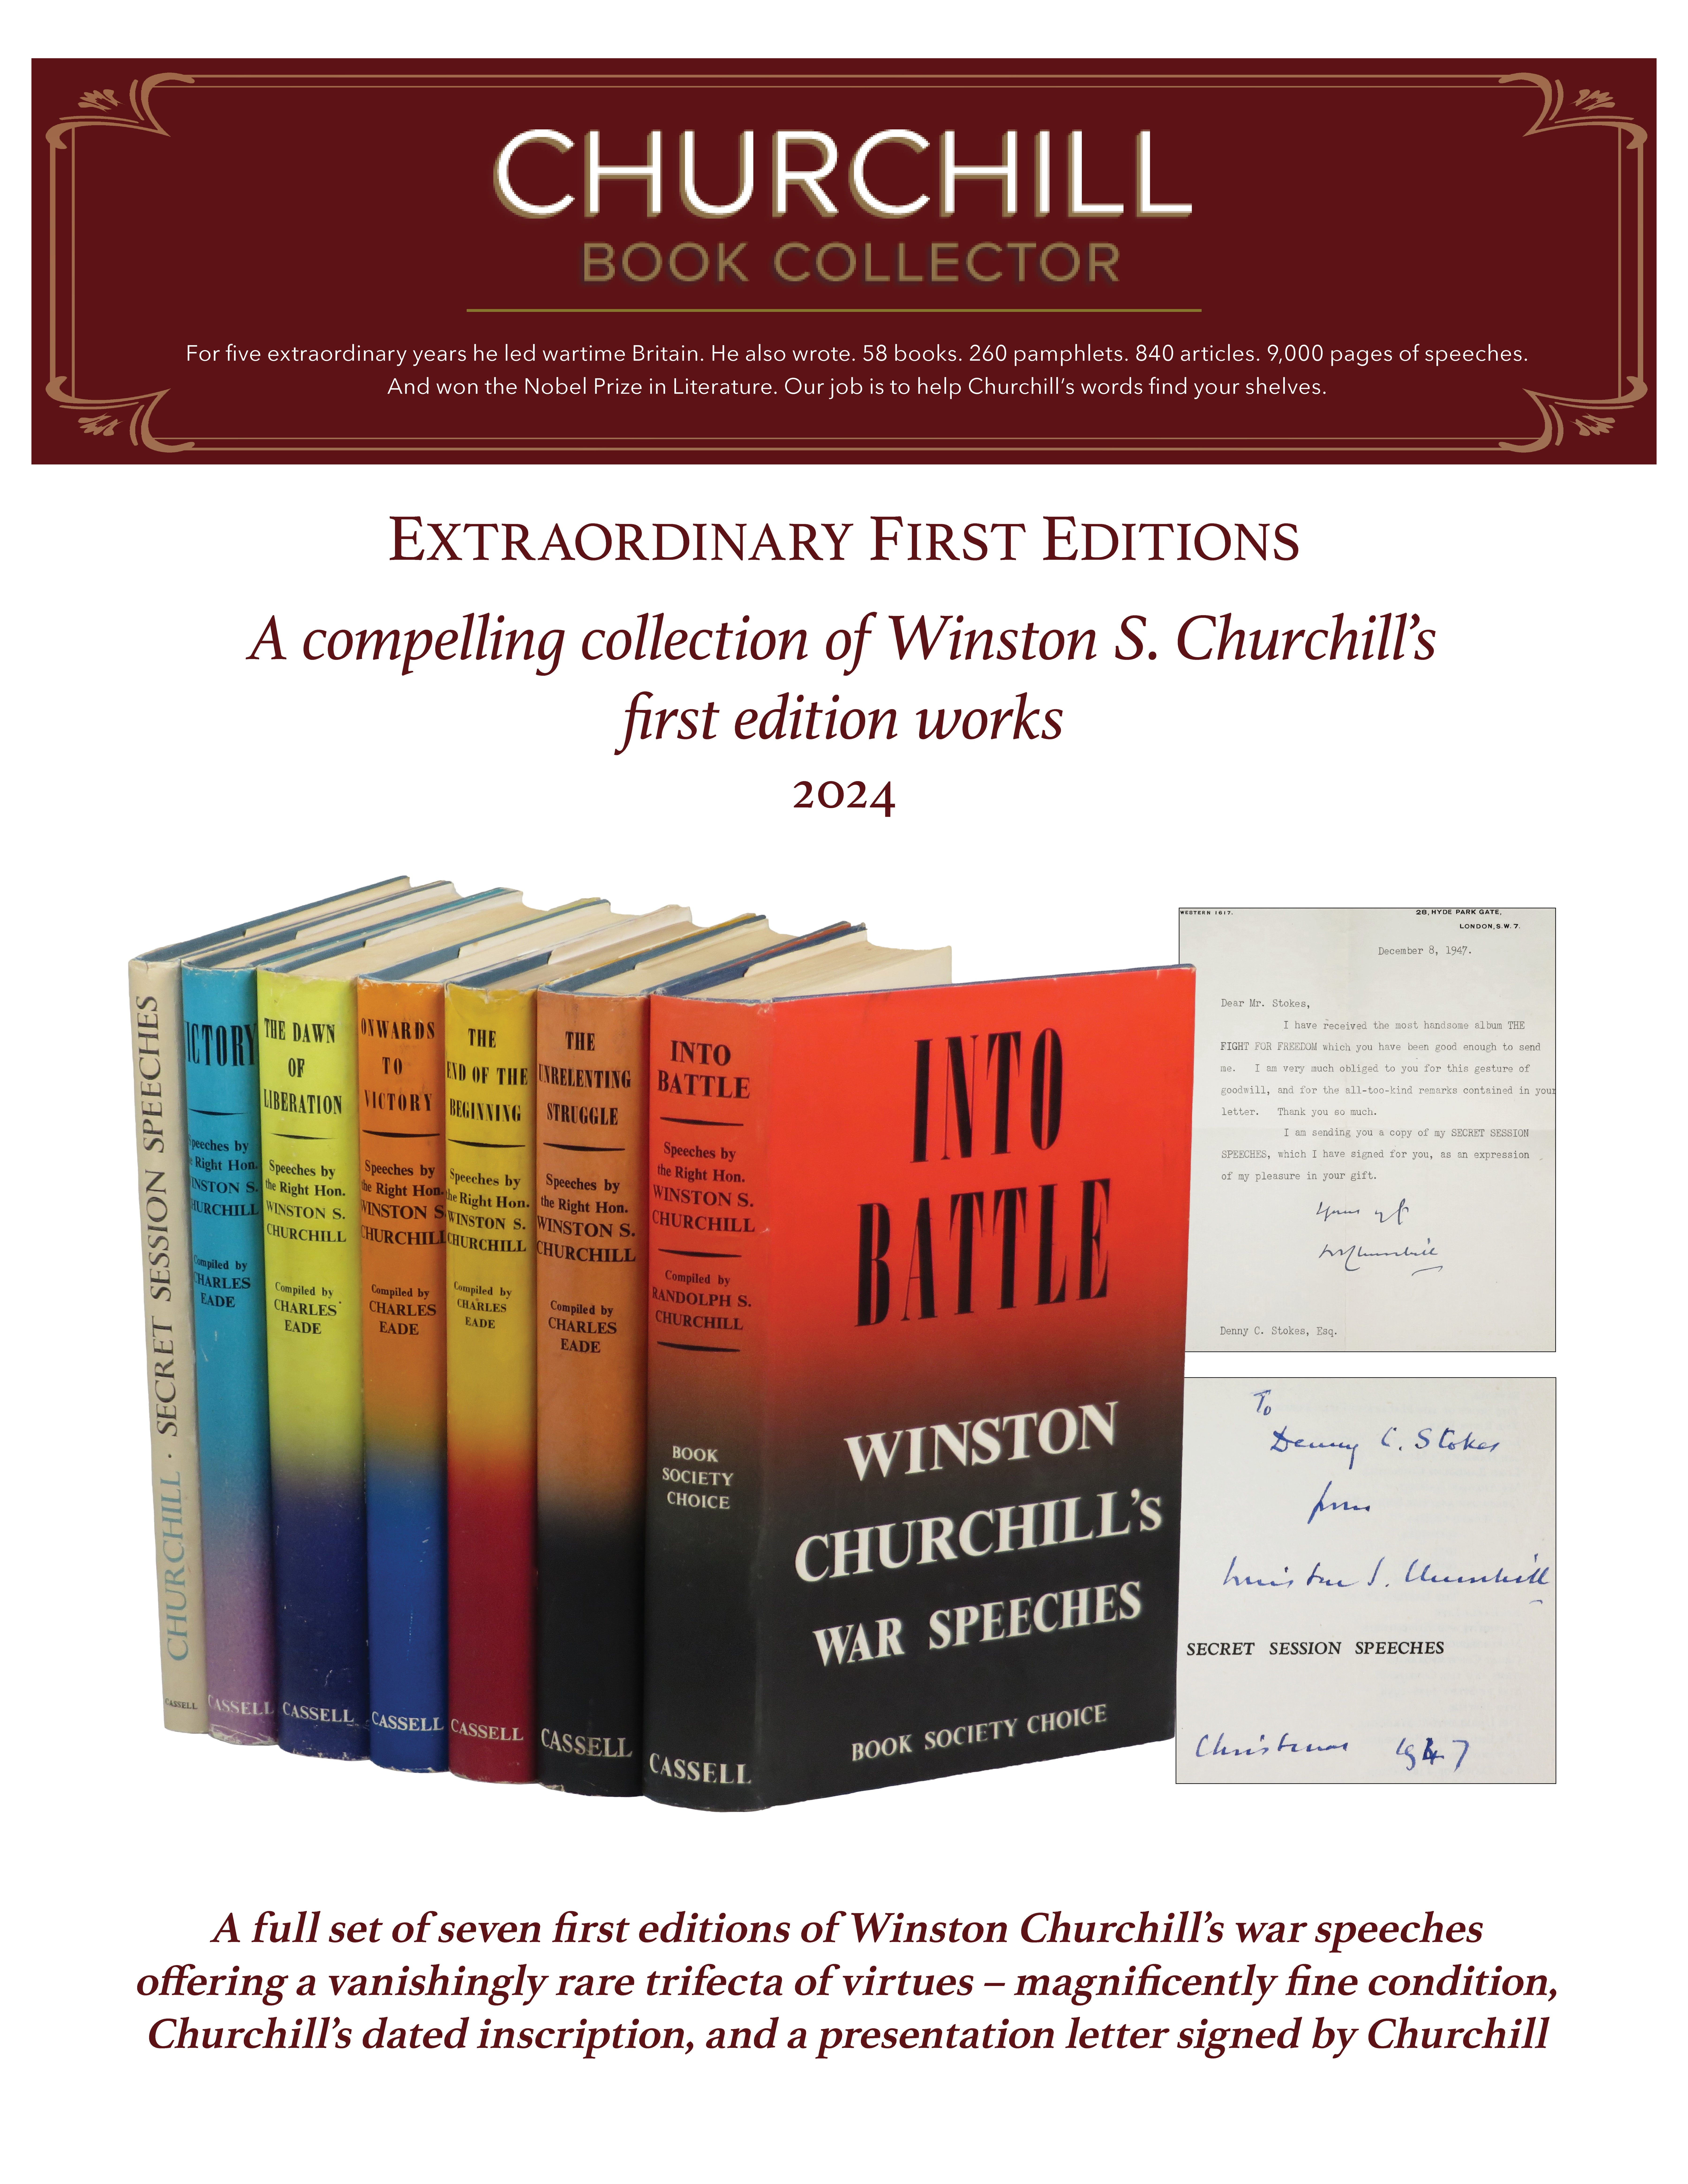 Extraordinary First Editions - 2024